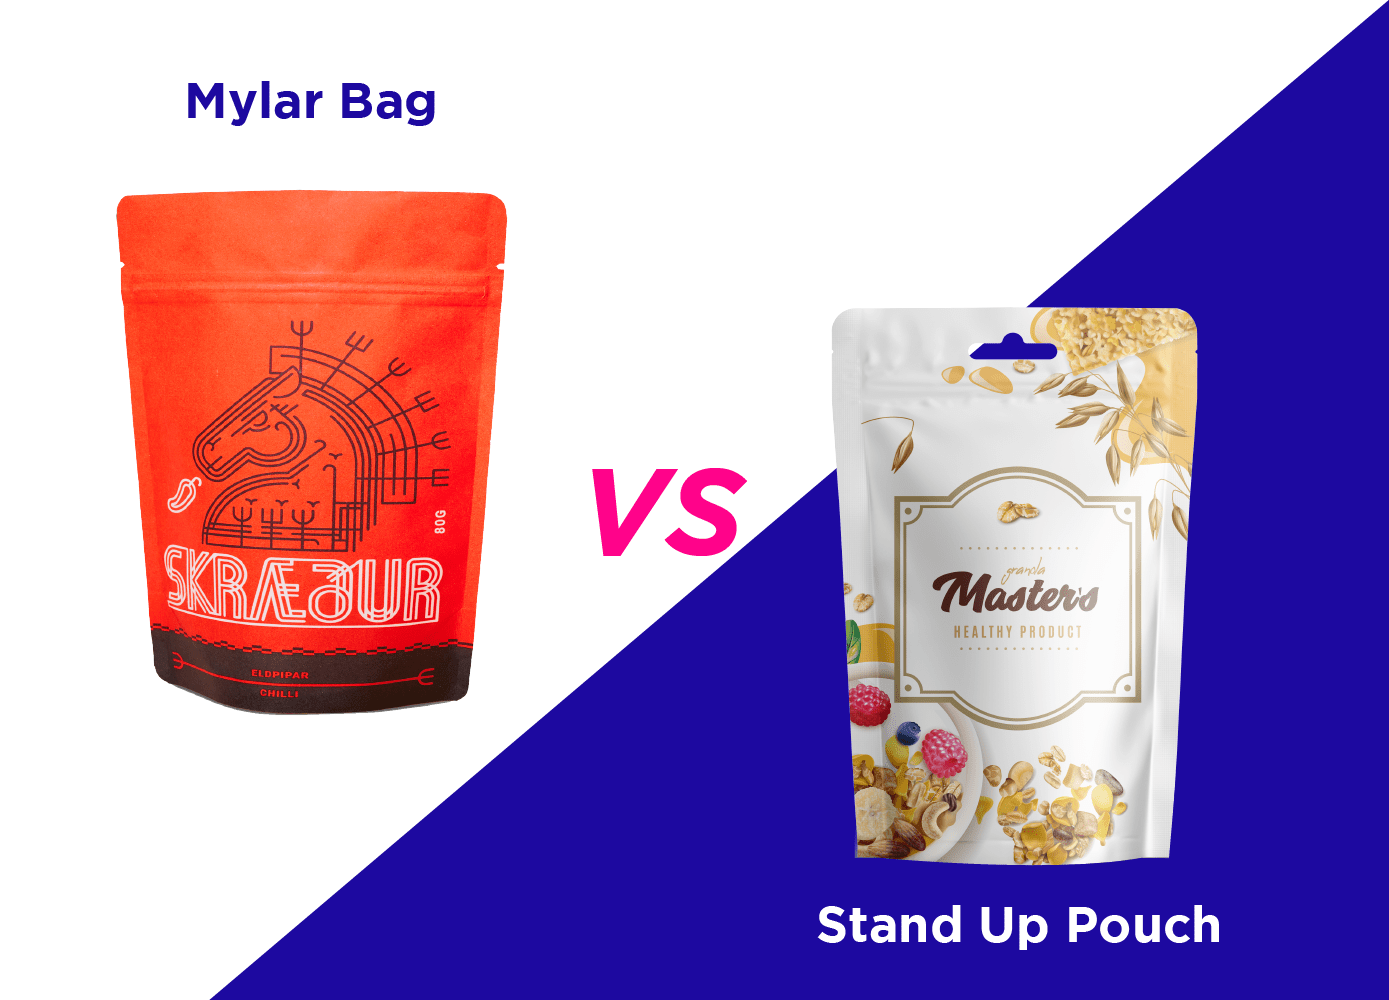 Mylar bag or stand up pouch Mylar Bag vs Stand Up Pouch